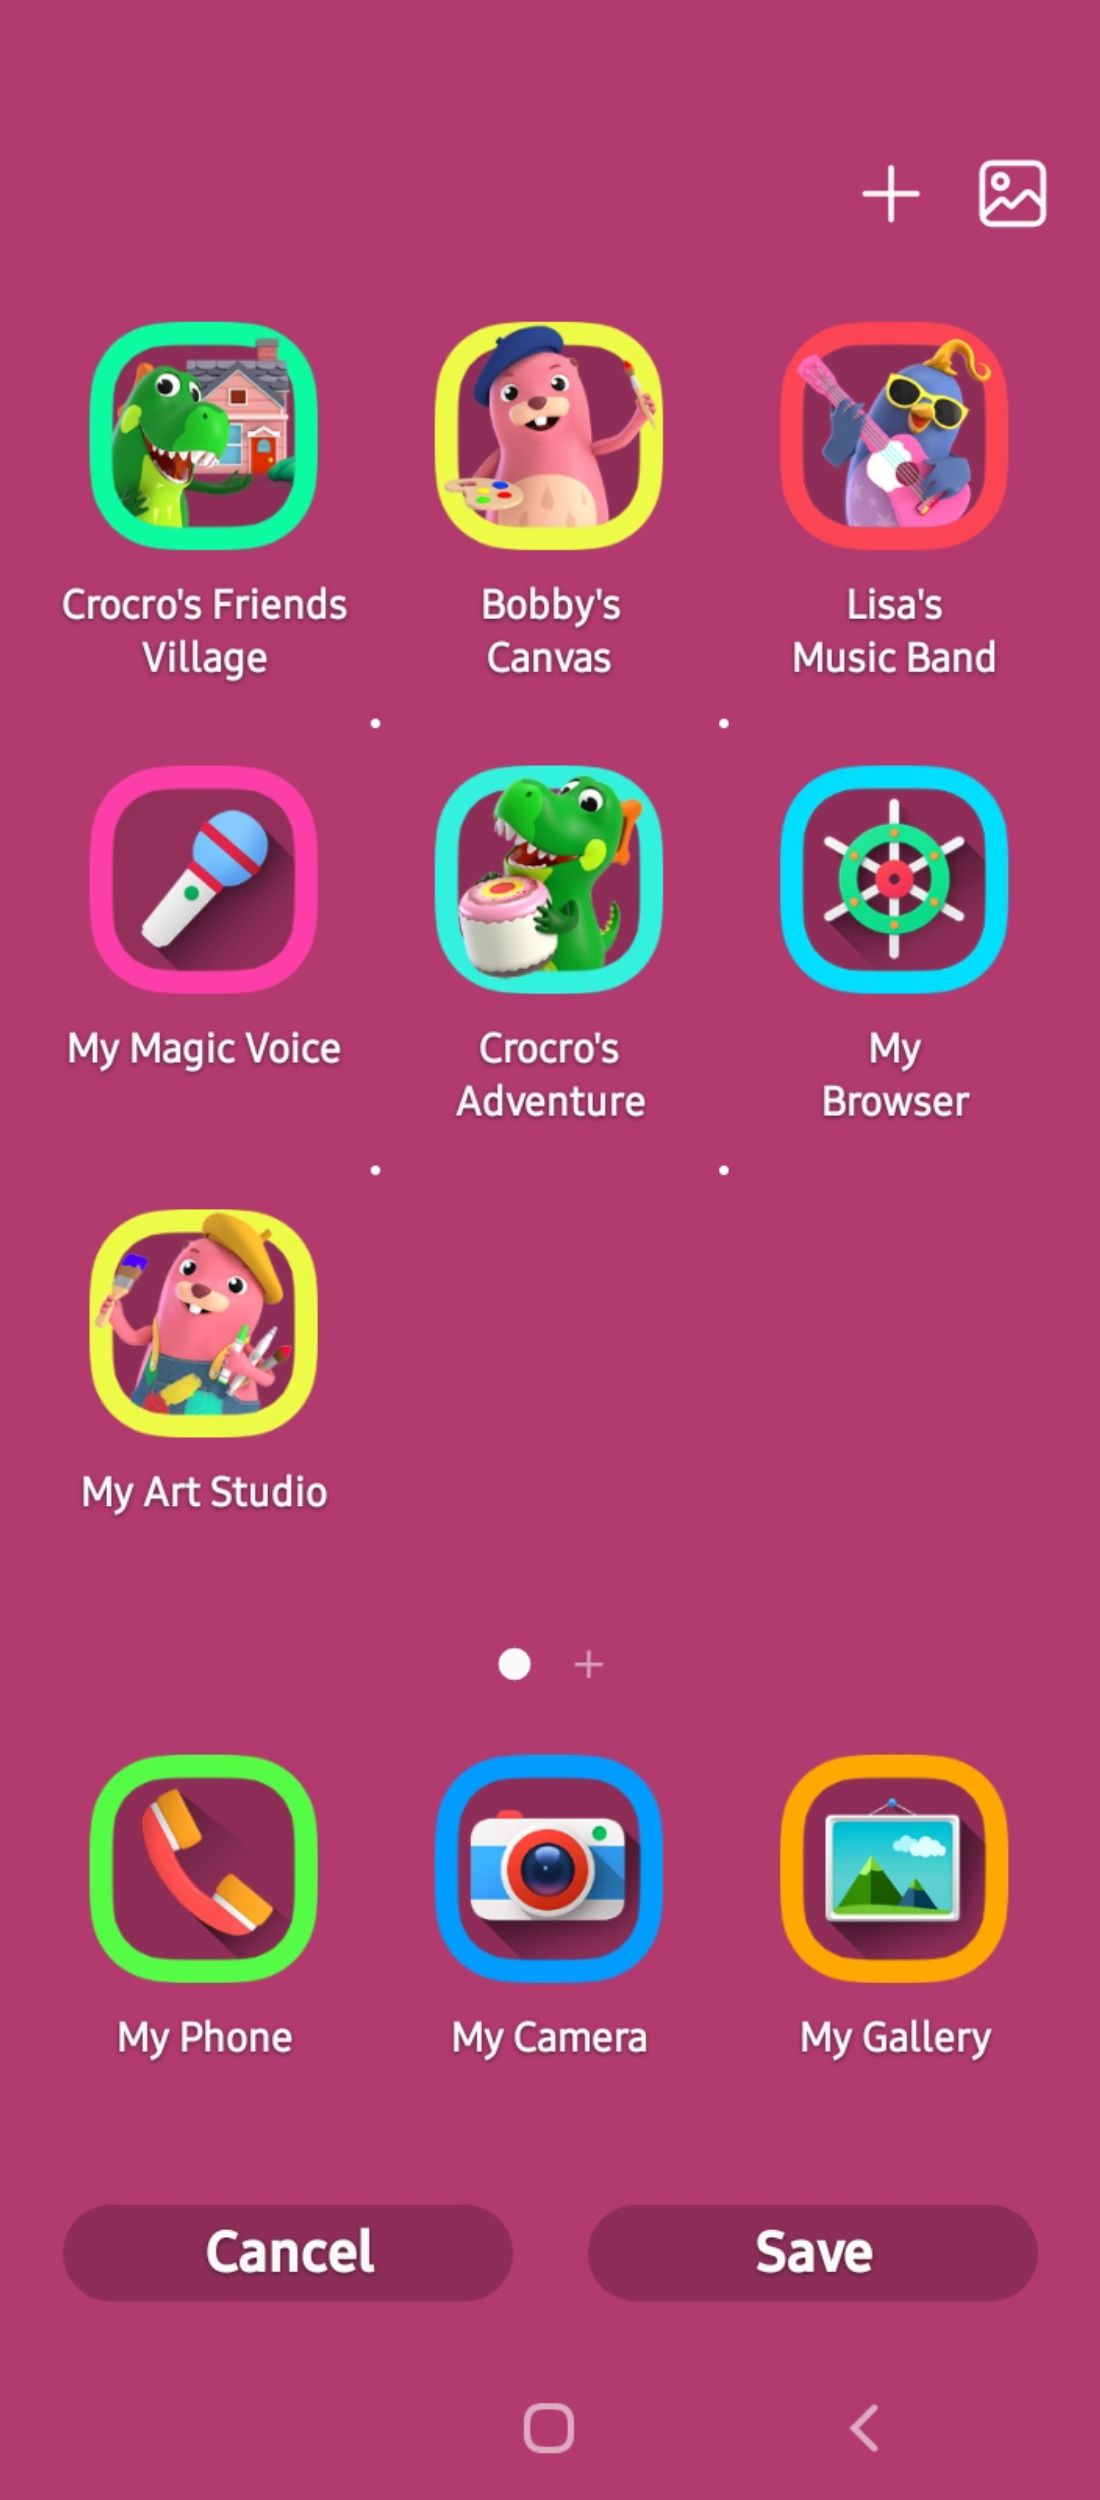 Wallpaper themes changed in Samsung Kids Mode